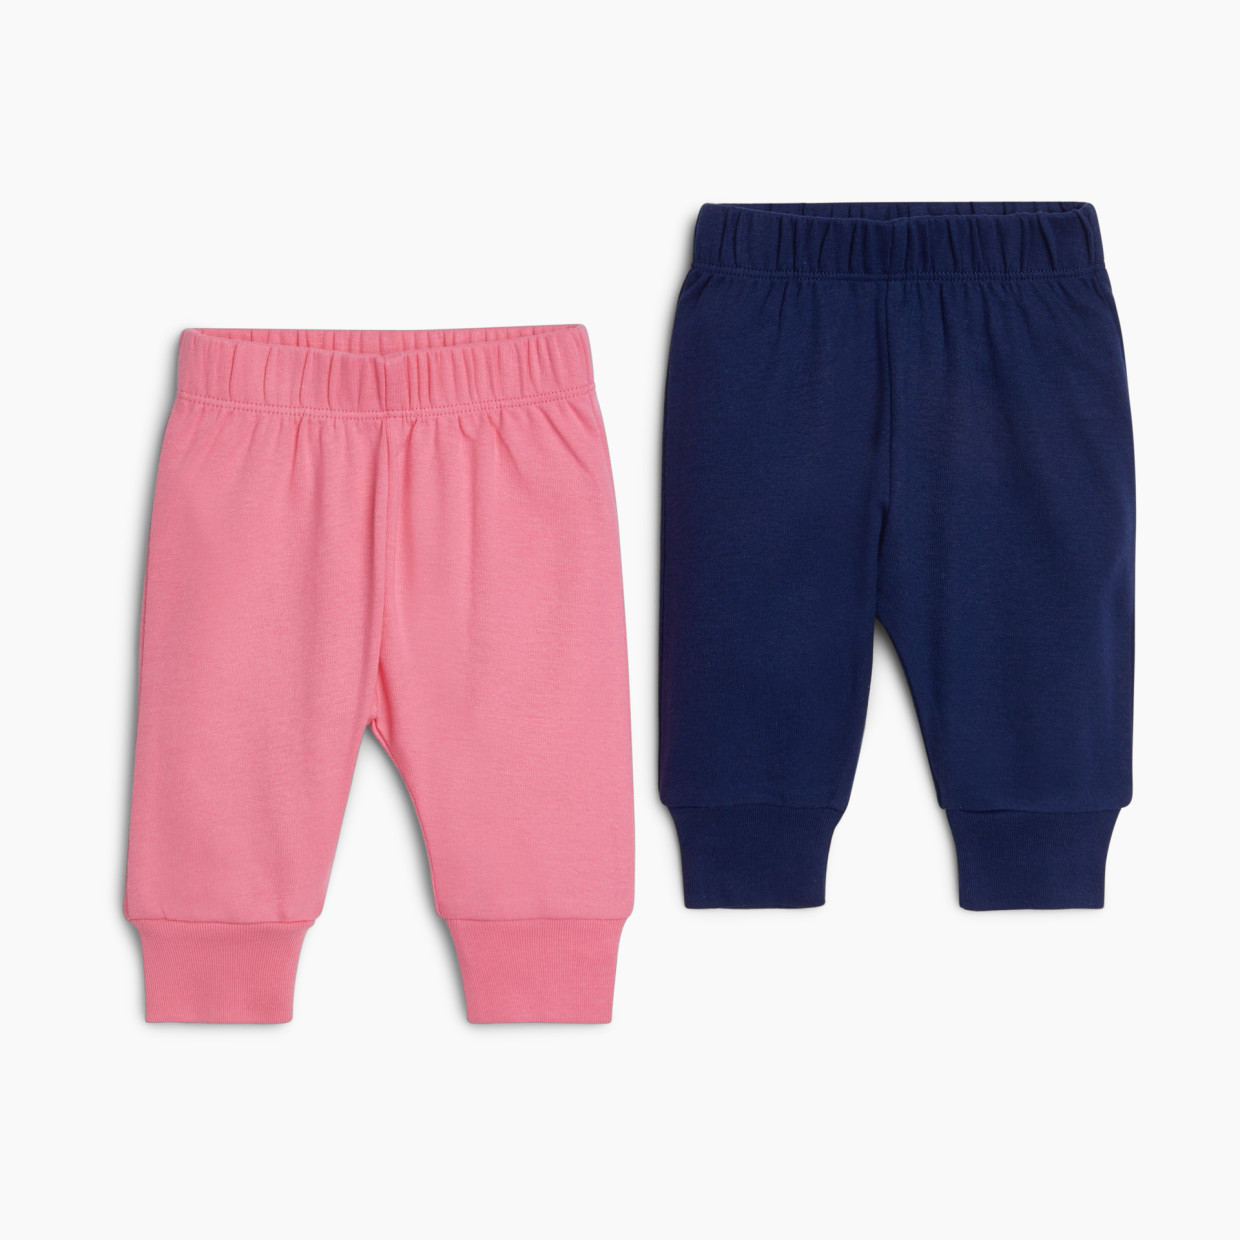 Small Story Pants (2 Pack) - Navy/Pink, 0-3 M.